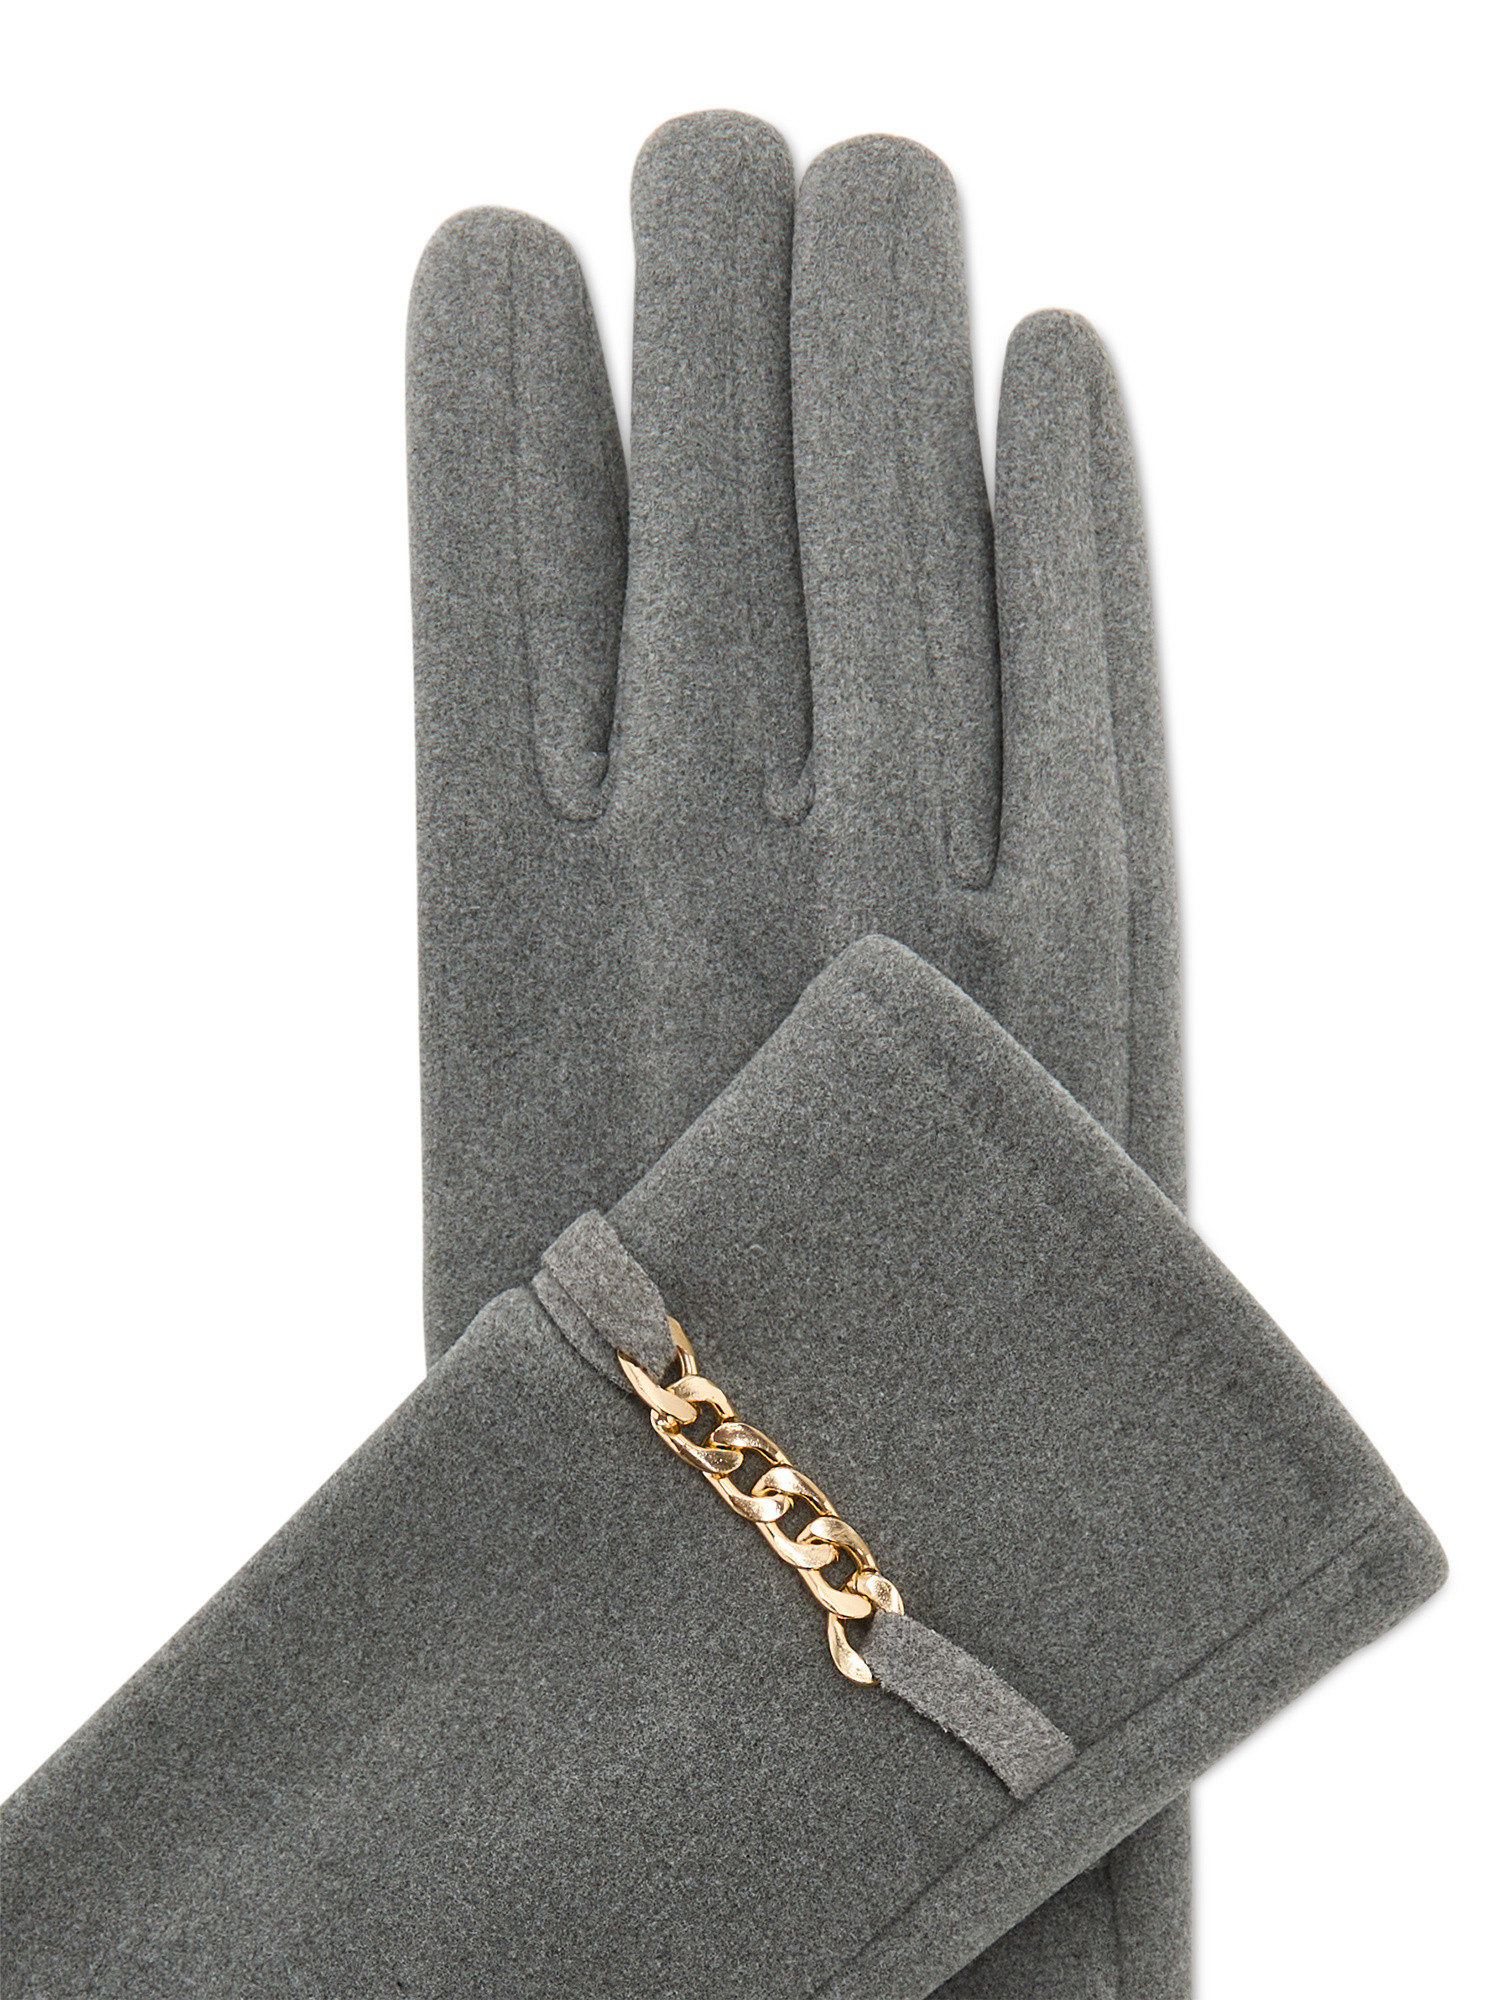 Koan - Micro fiber gloves with chain, Grey, large image number 1